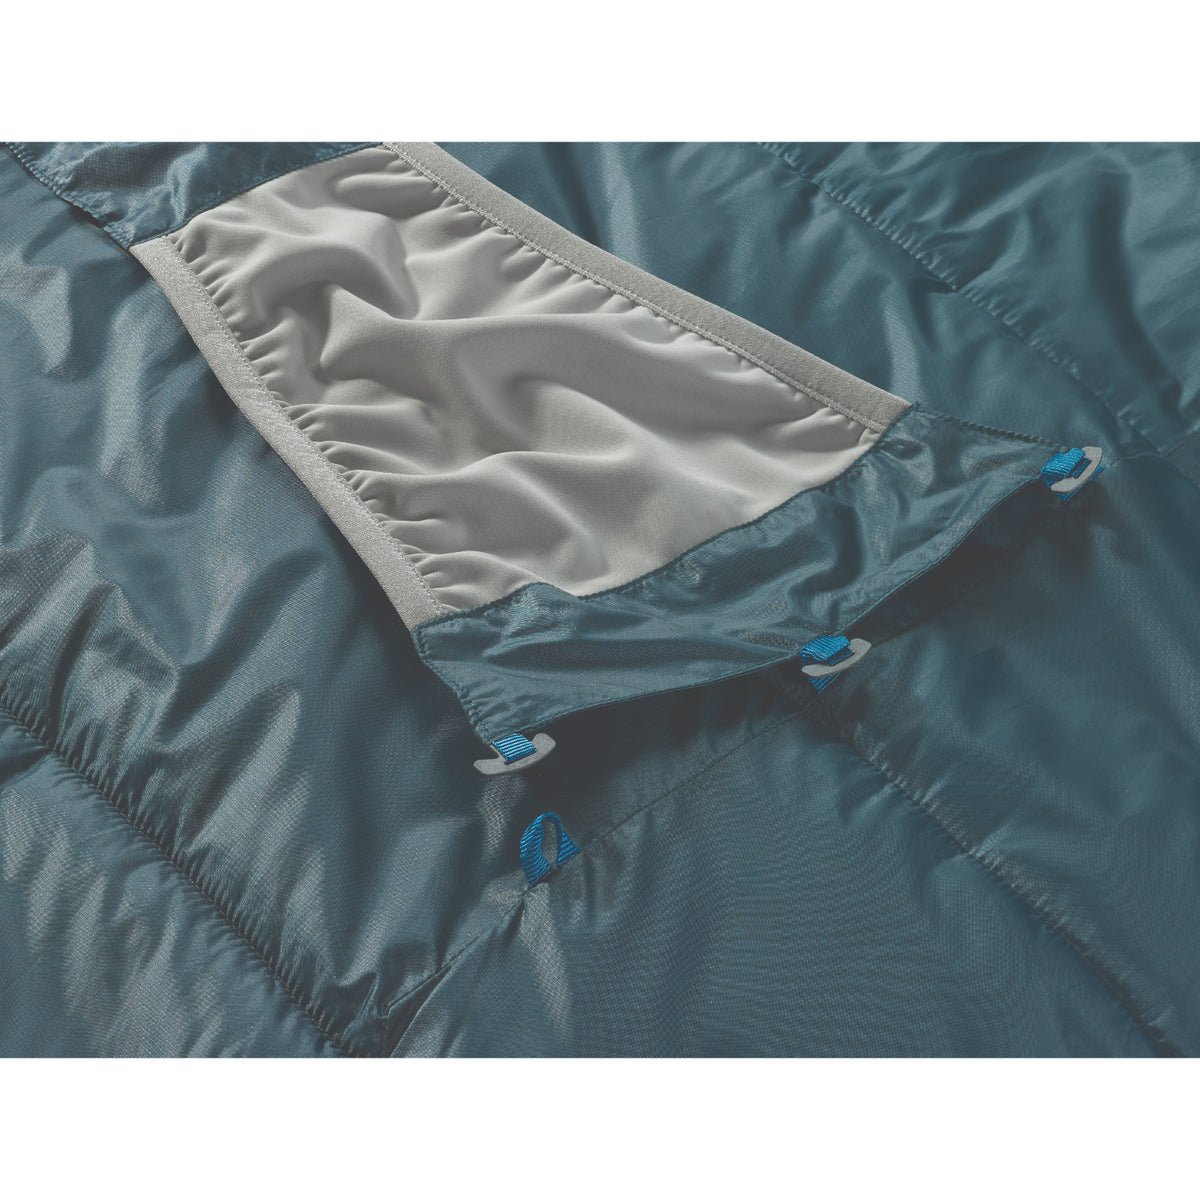 Thermarest Saros 20F/-6C synthetic sleeping bag in stargazer colour